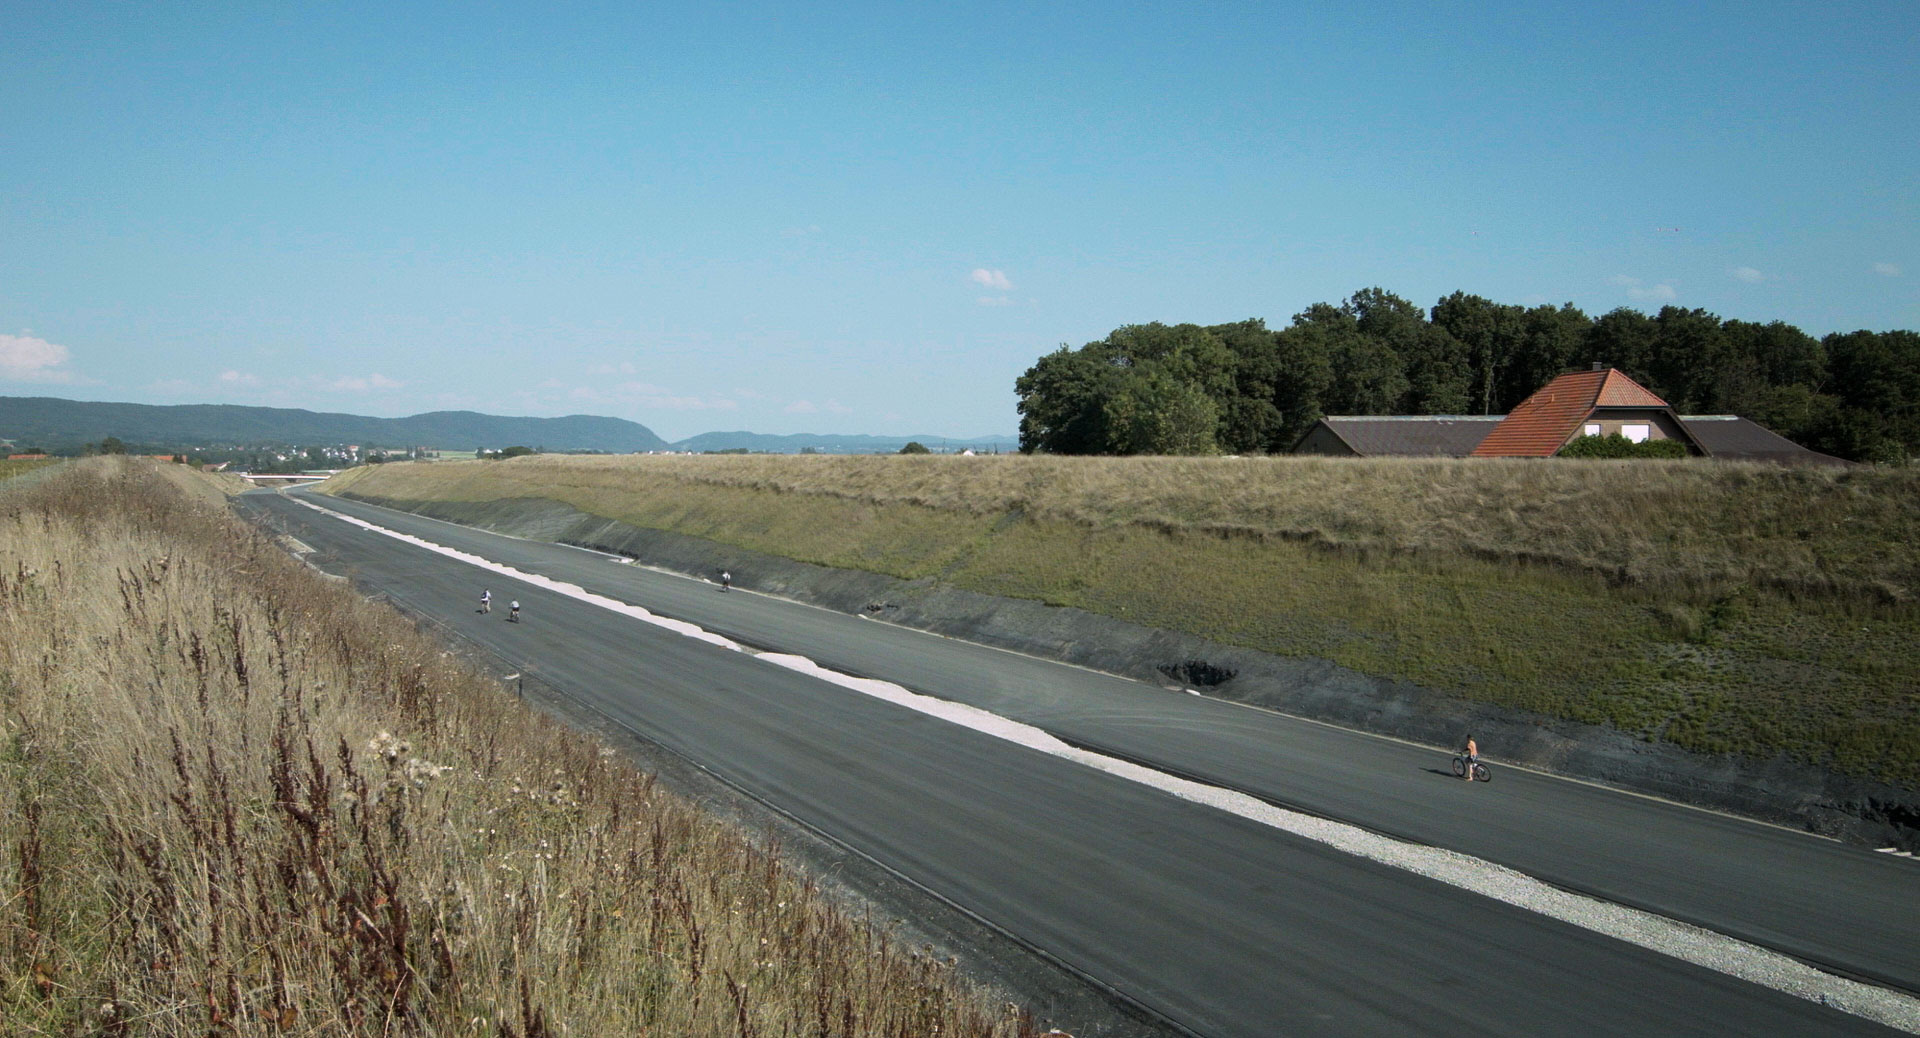 the fresh builded motorway without cars but with bicycles